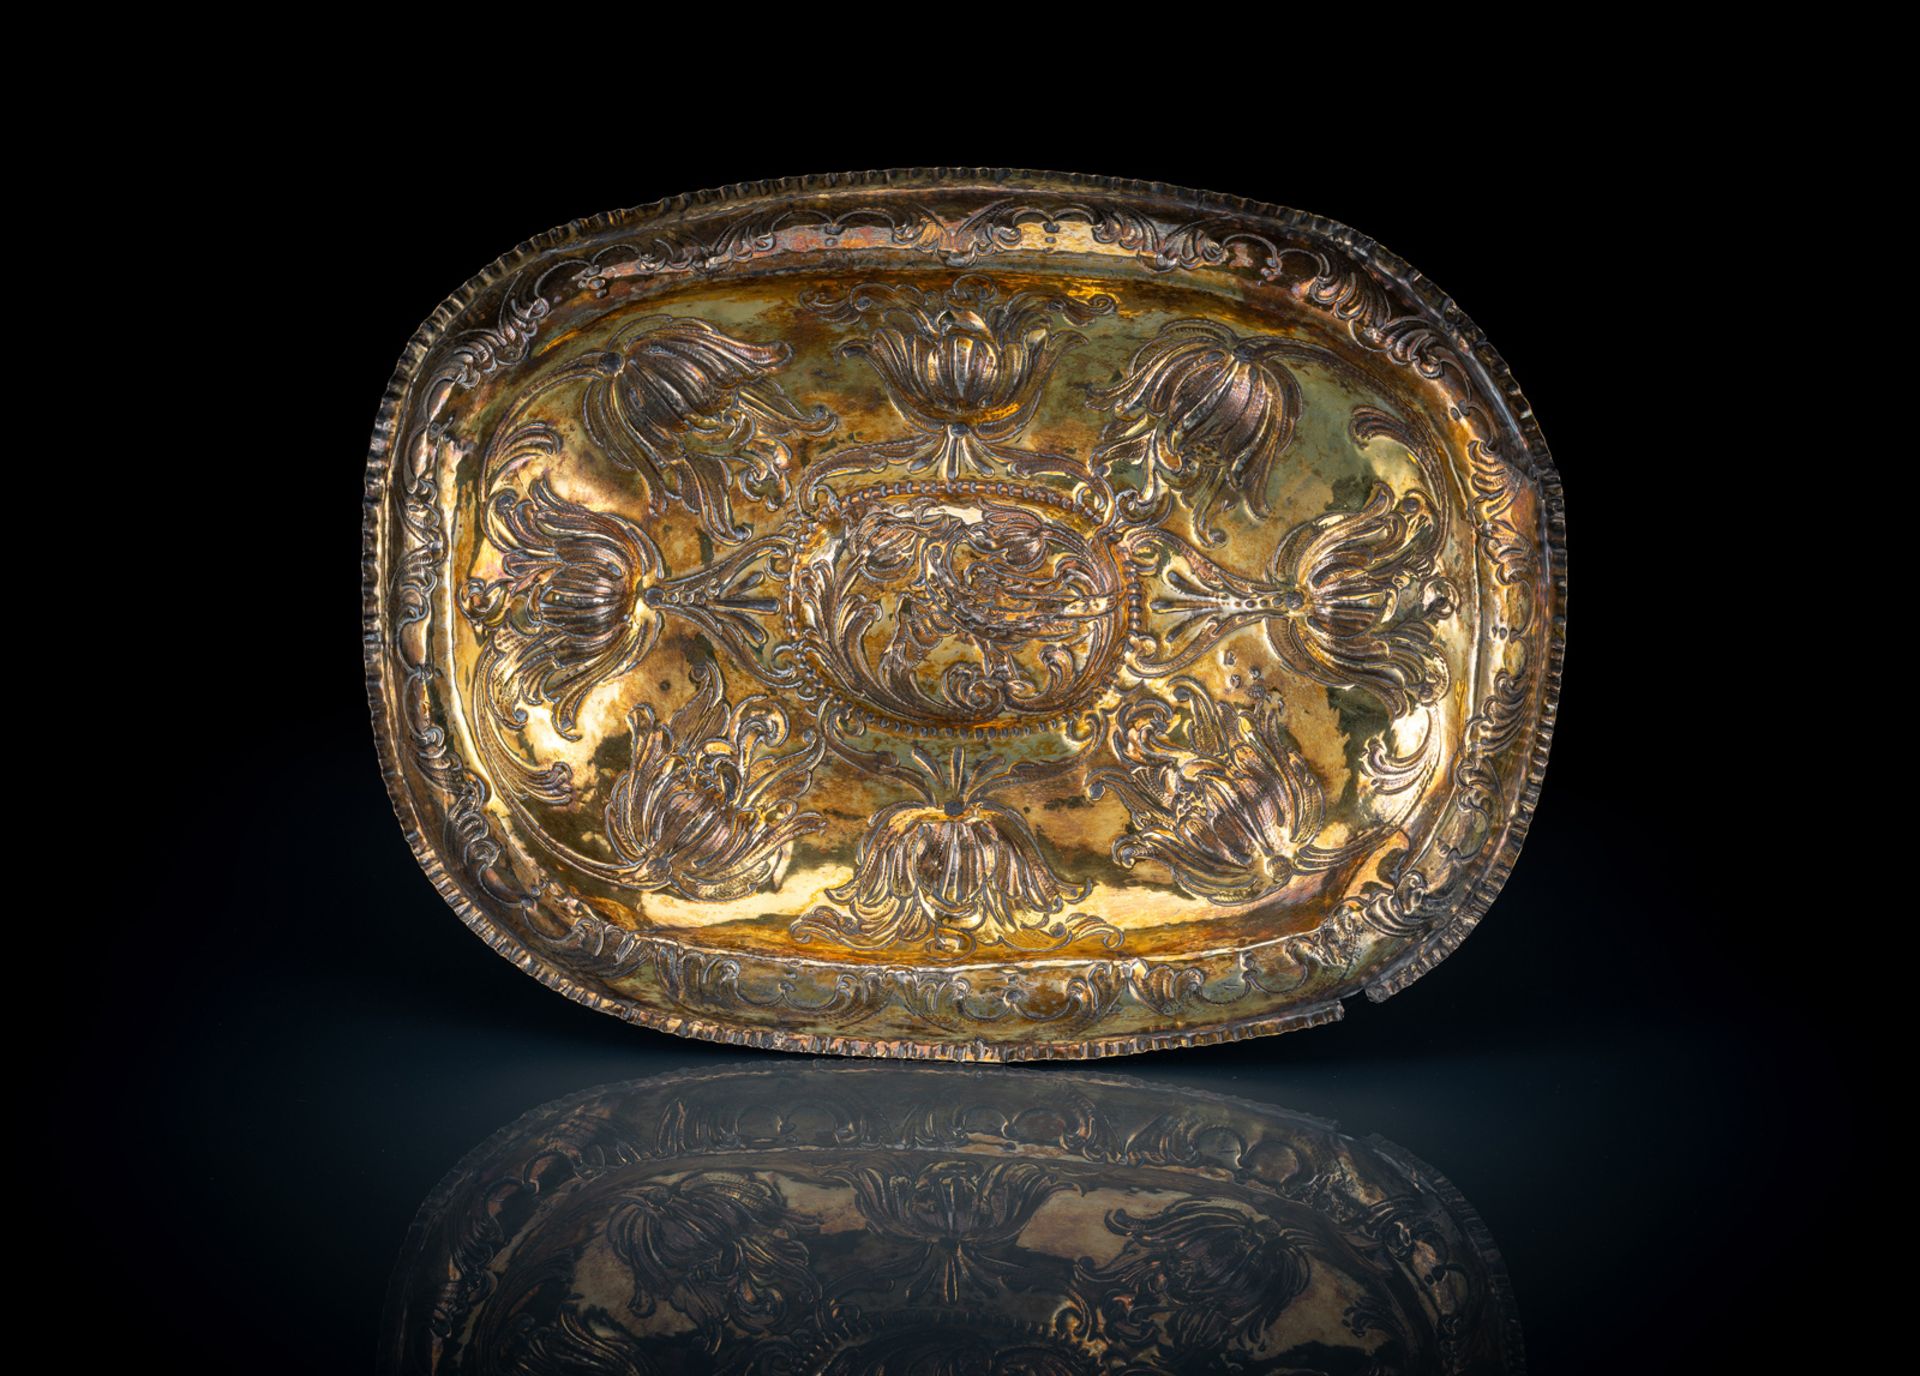 AN EMBOSSED SPANISH VERMEIL OVAL DISH